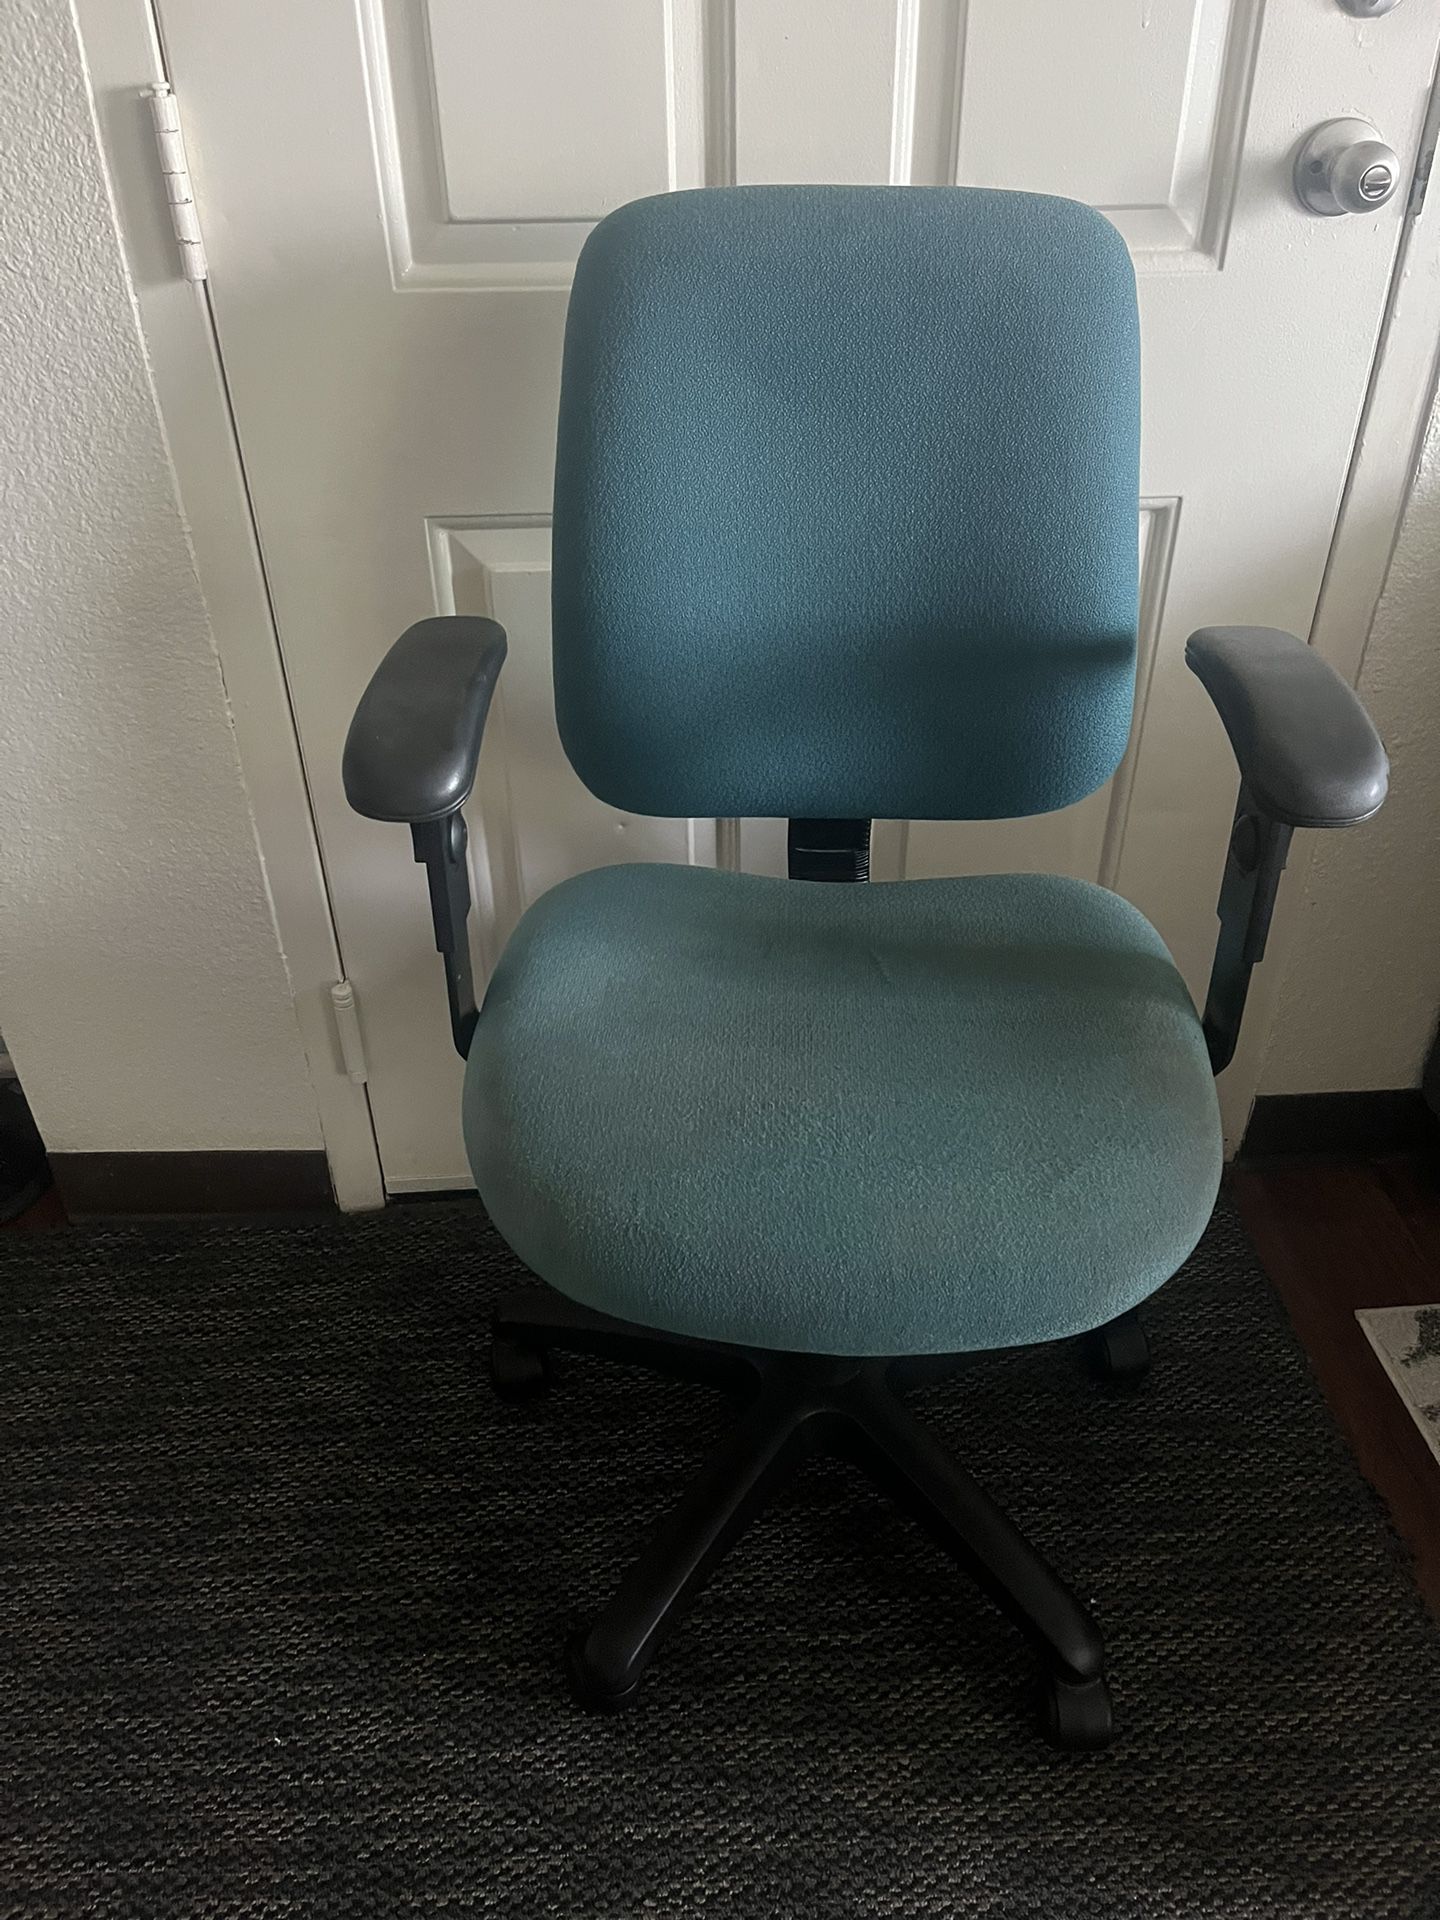 Office master professional Healthcare Task Chair/Desk Chair,Office Chair  Retail $280 for Sale in San Diego, CA - OfferUp